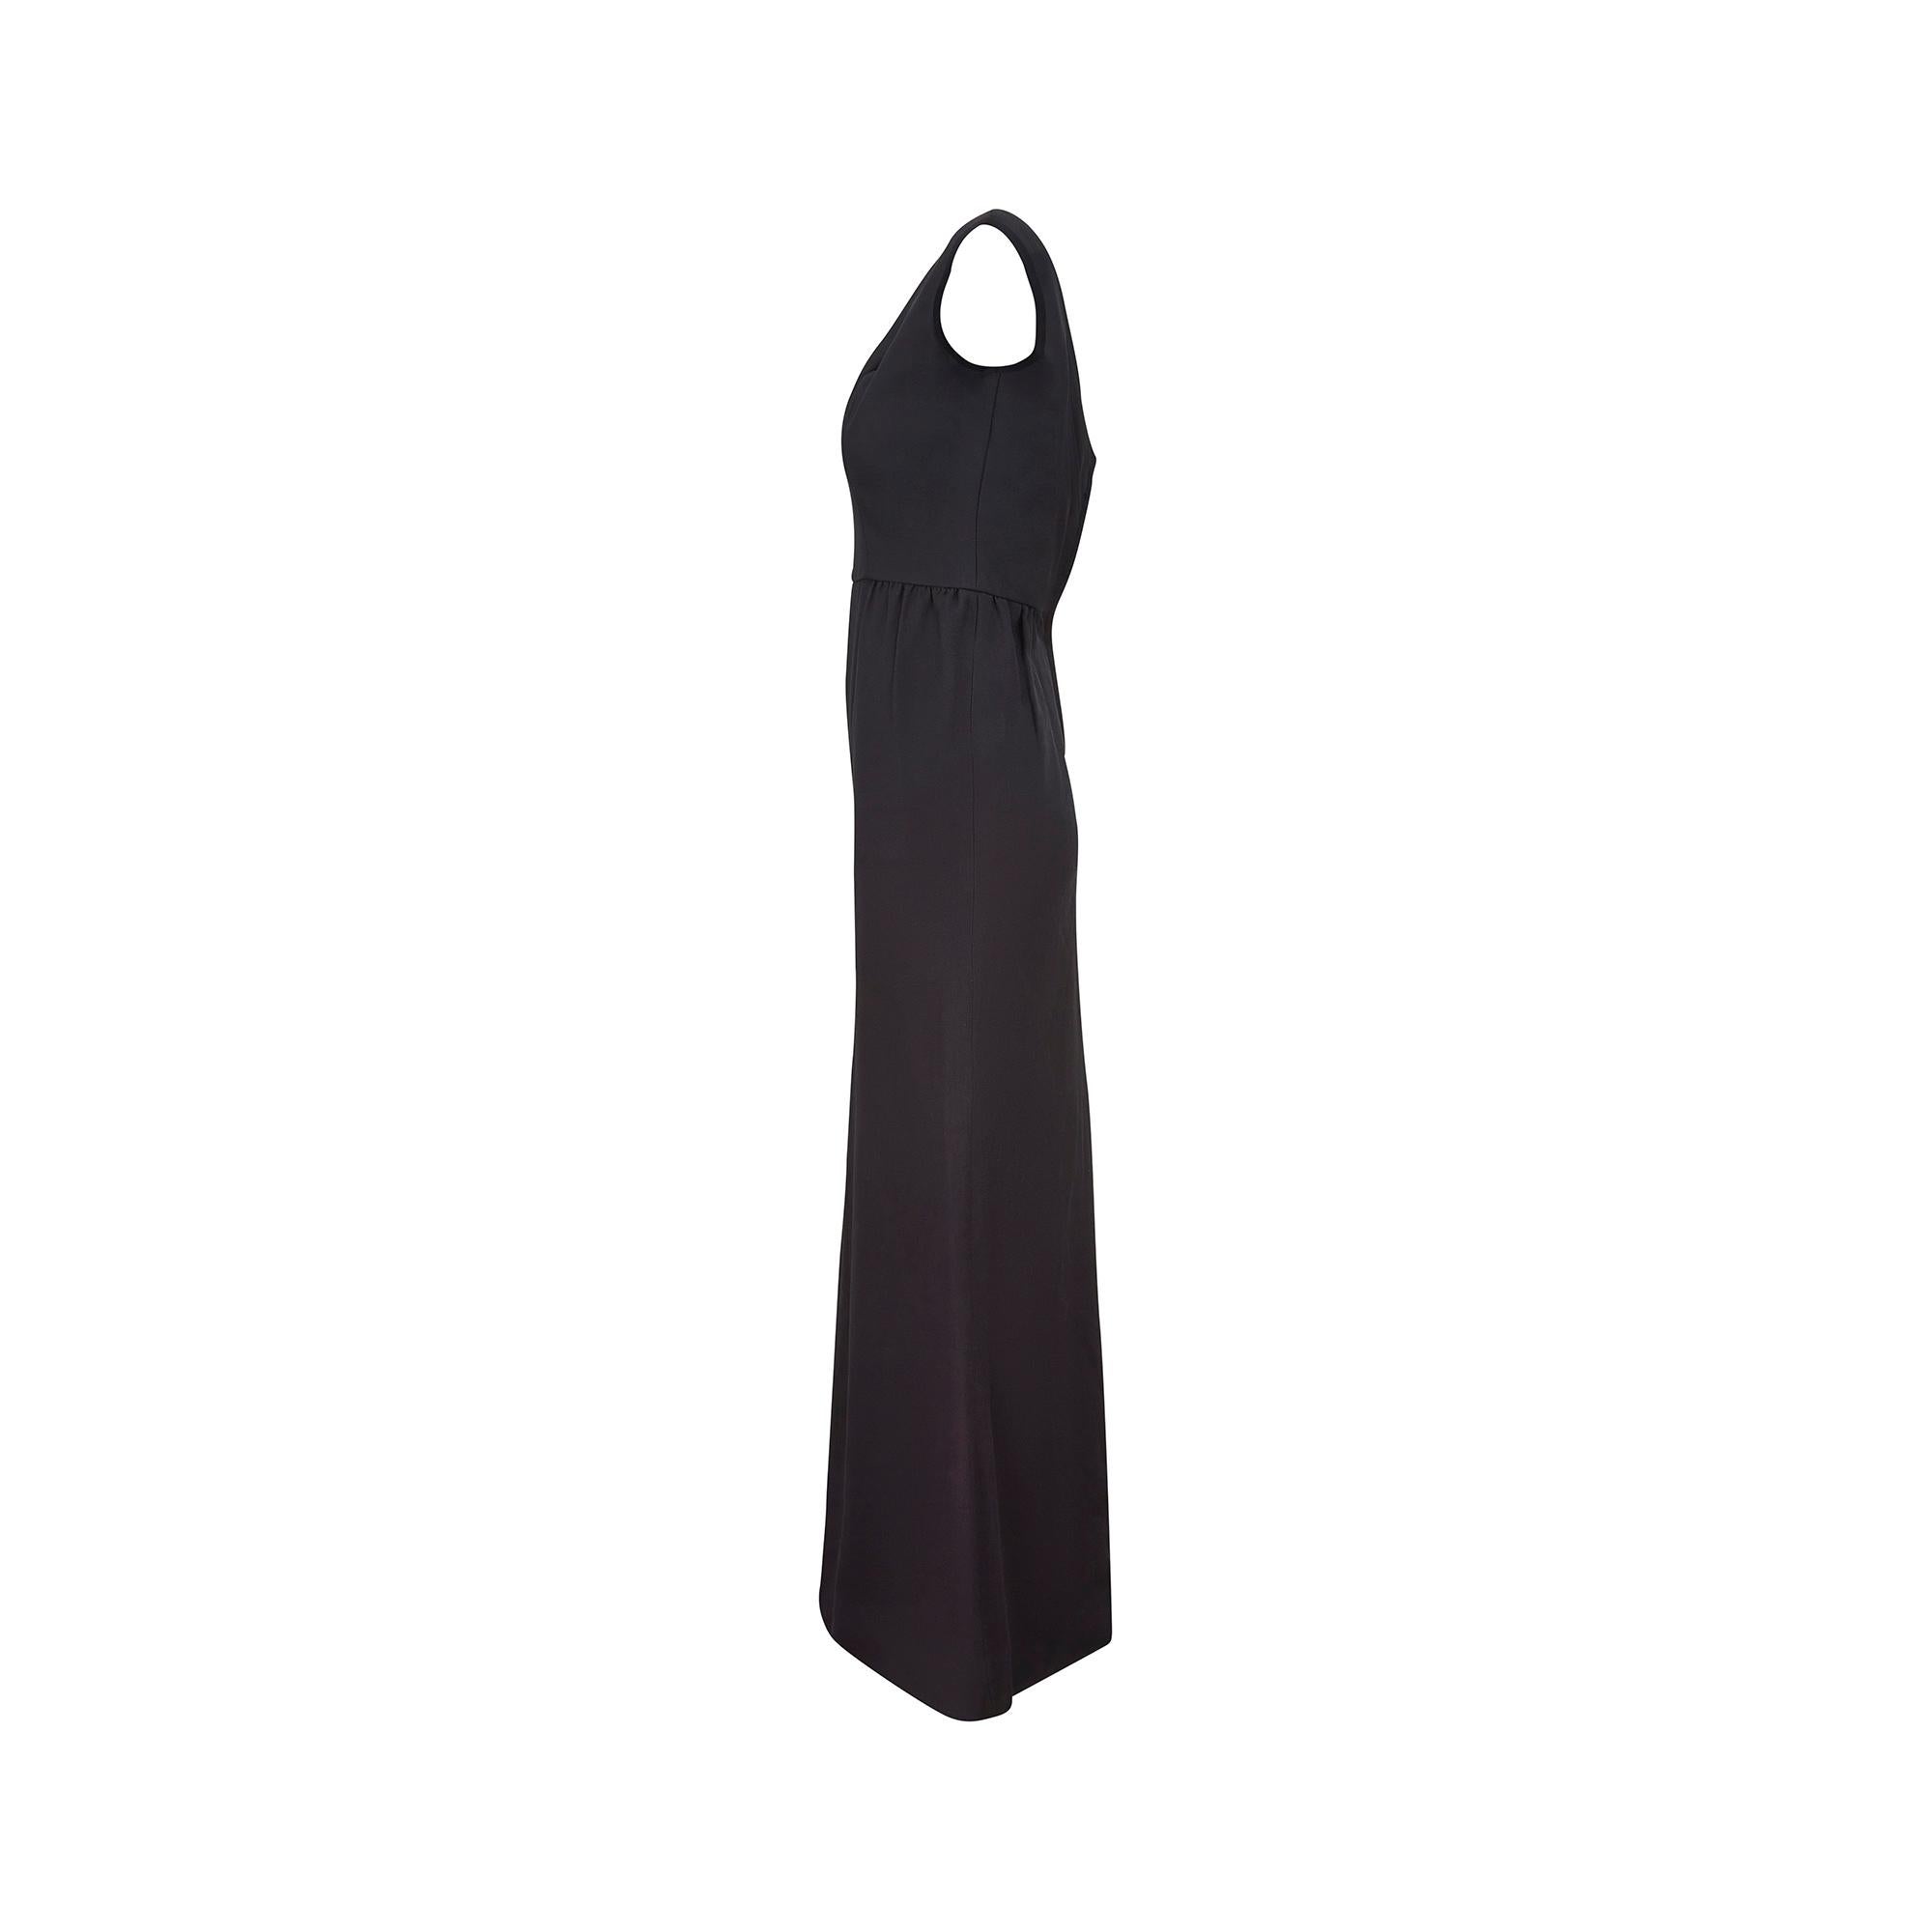 1960s Black Crepe Full Length Fishtail Evening Dress In Excellent Condition For Sale In London, GB